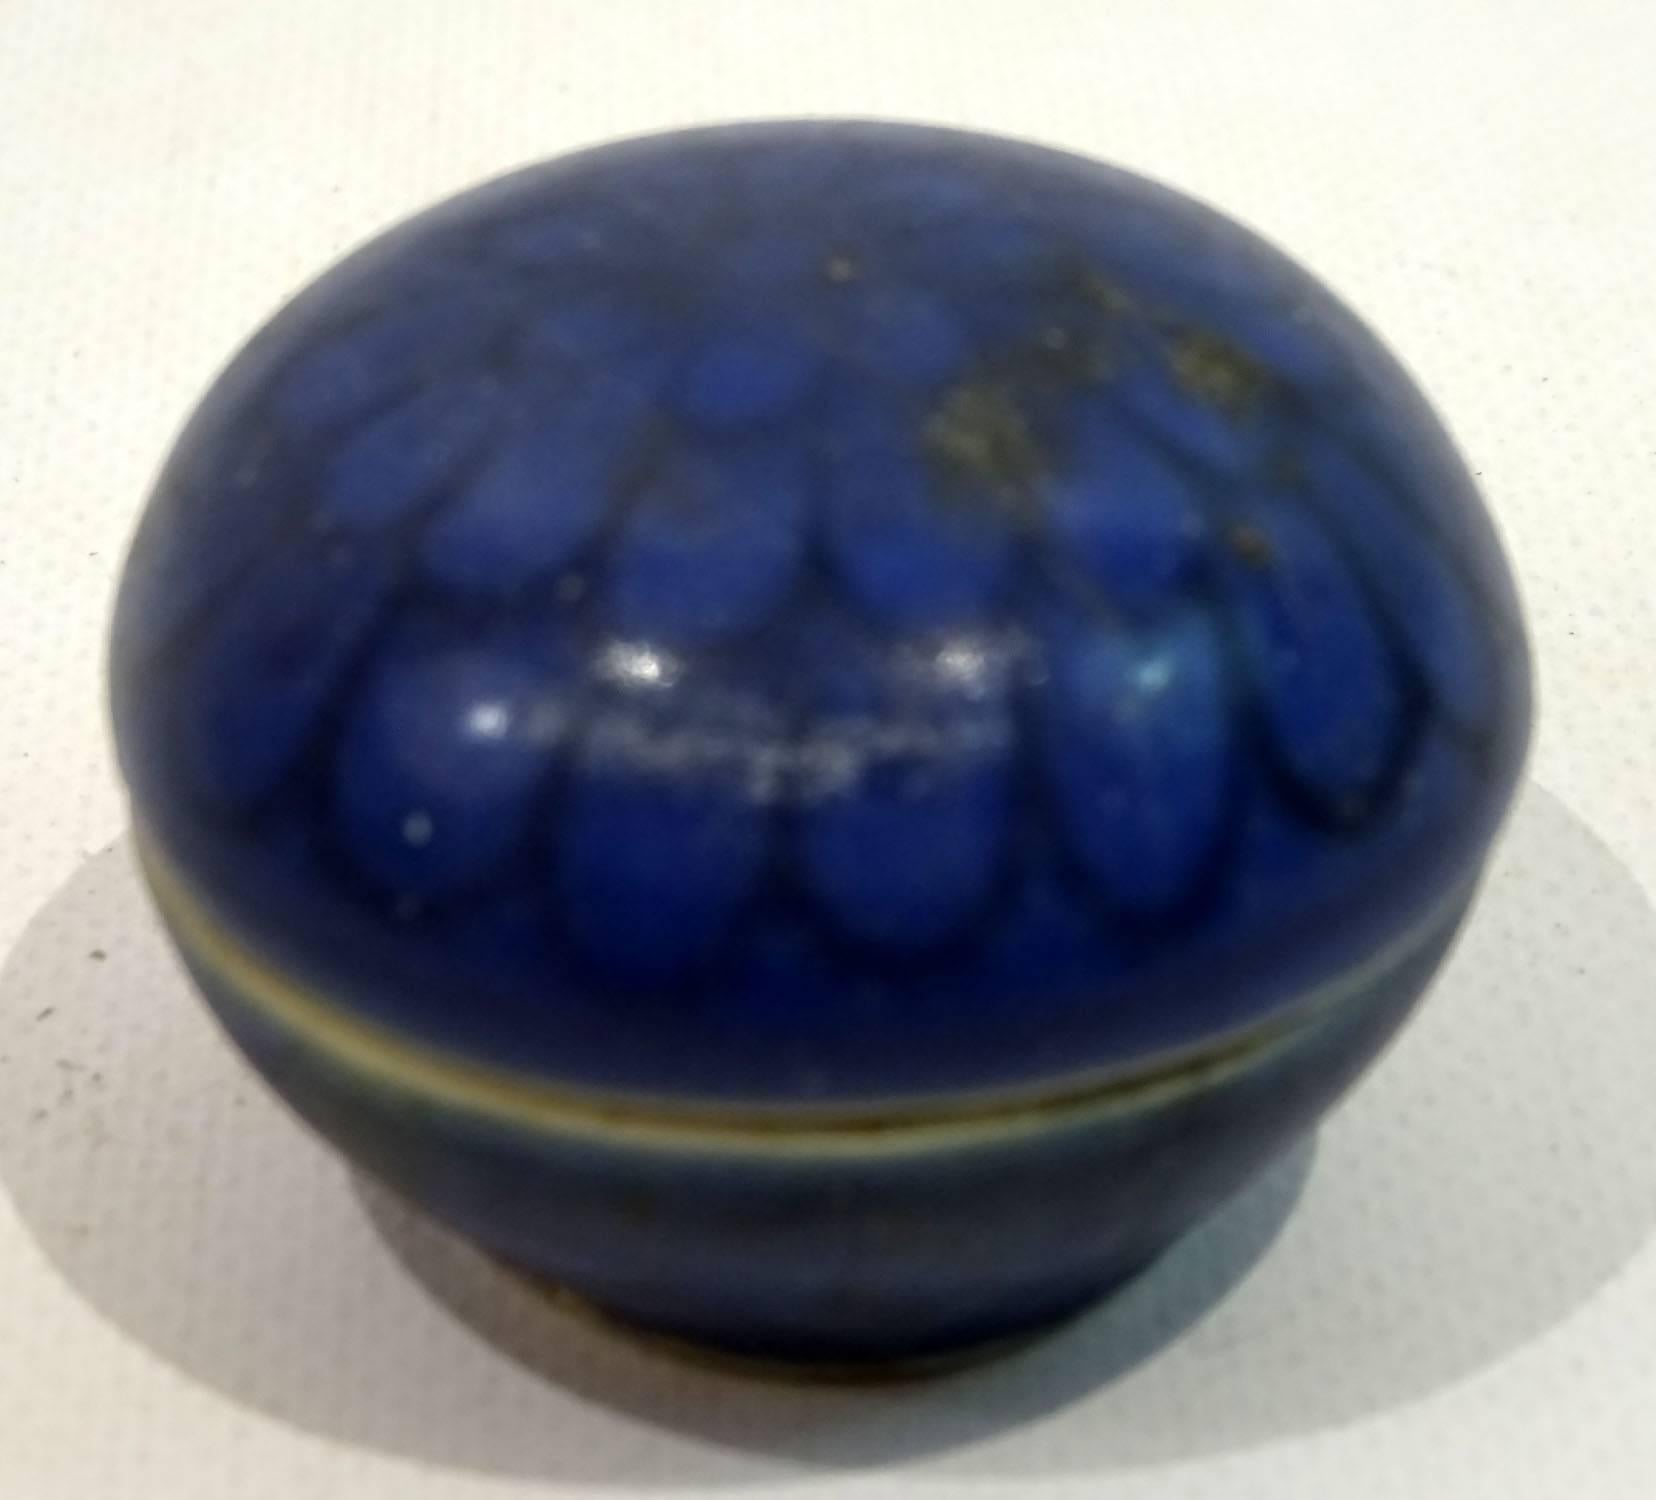 17th Century Chinese Porcelain Cosmetic Jar with Lid from The Hatcher Collection 4